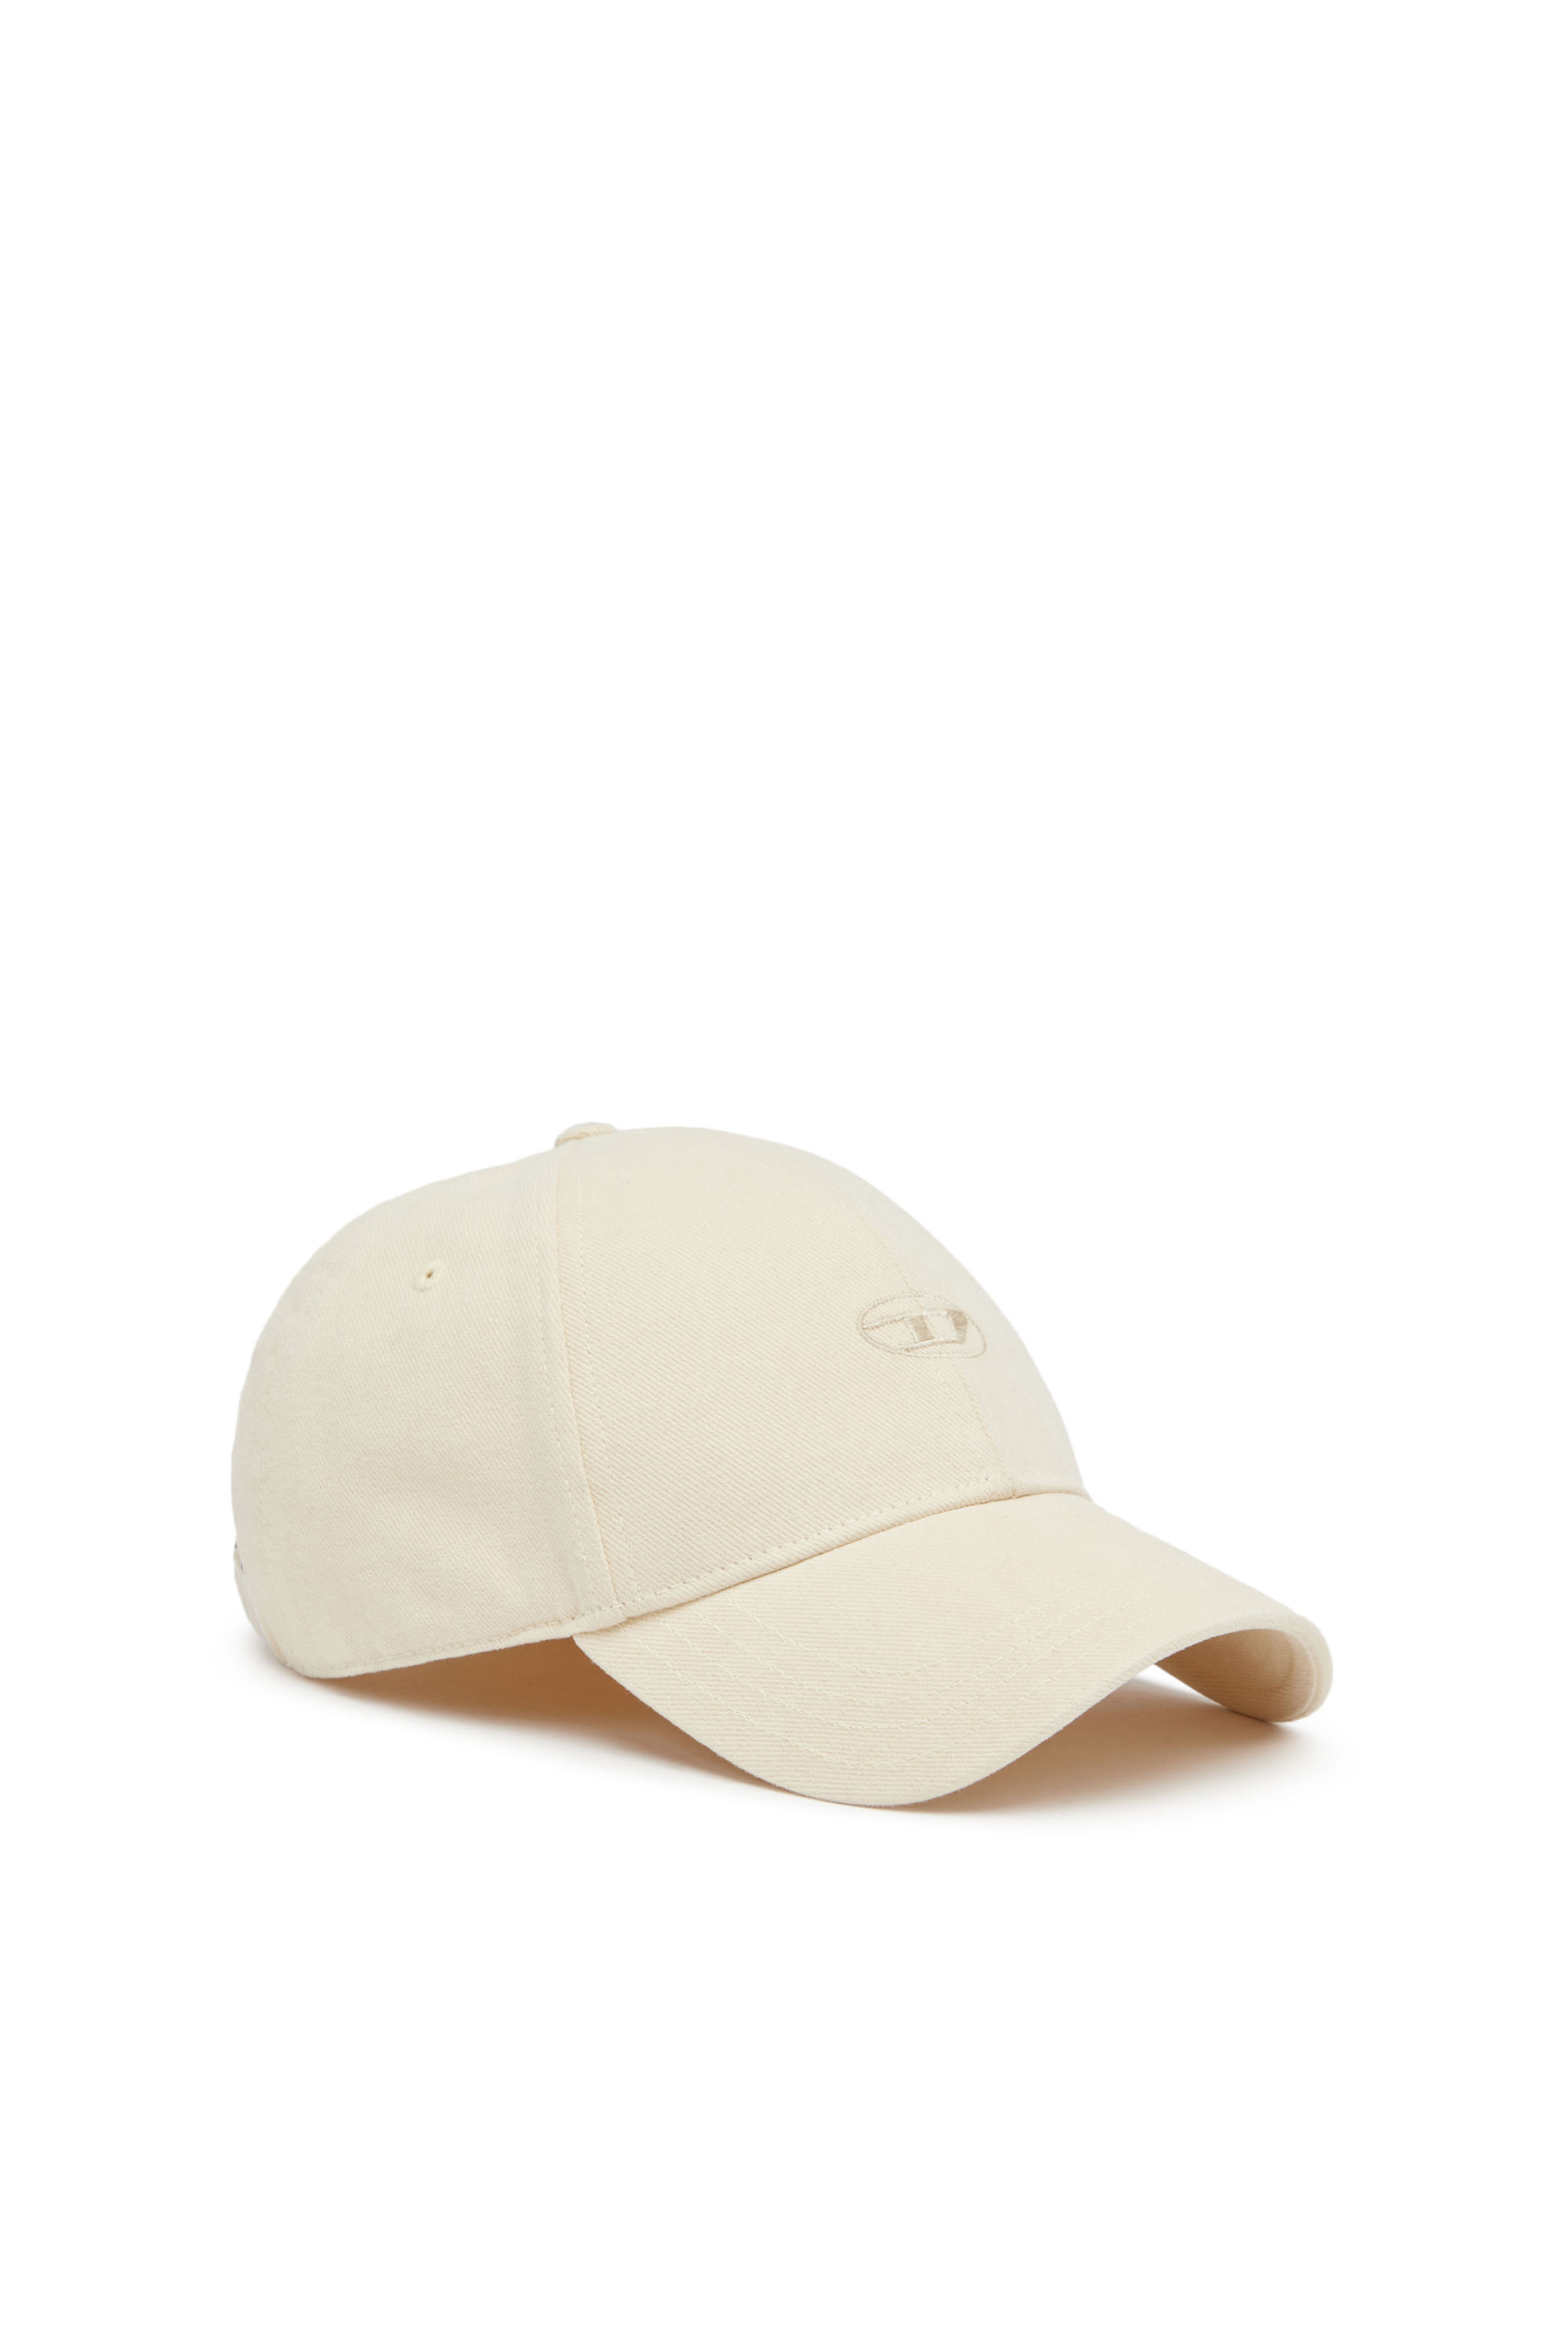 Diesel - C-RUN-WASH, Male Baseball cap in washed cotton twill in White - Image 1